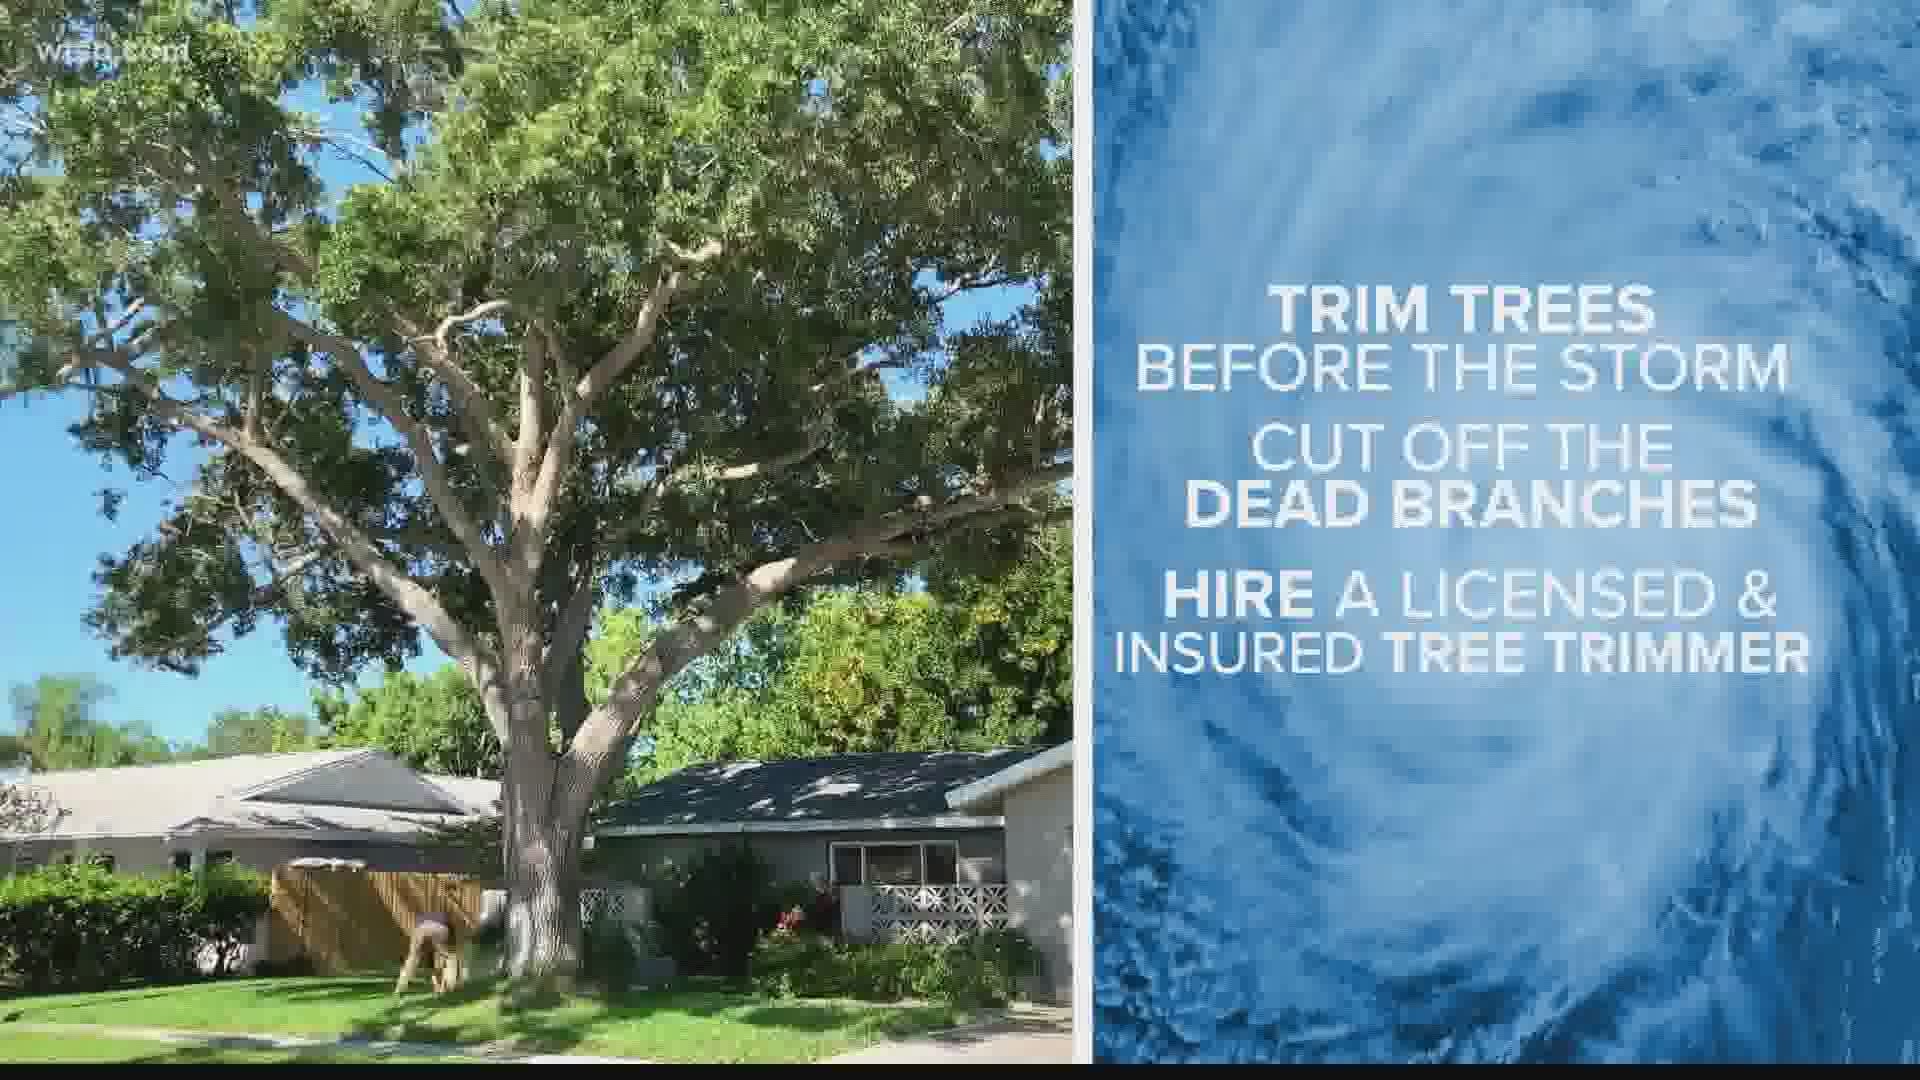 10 Tampa Bay meteorologist Grant Gilmore has some tips on how to get your yard ready for a hurricane.